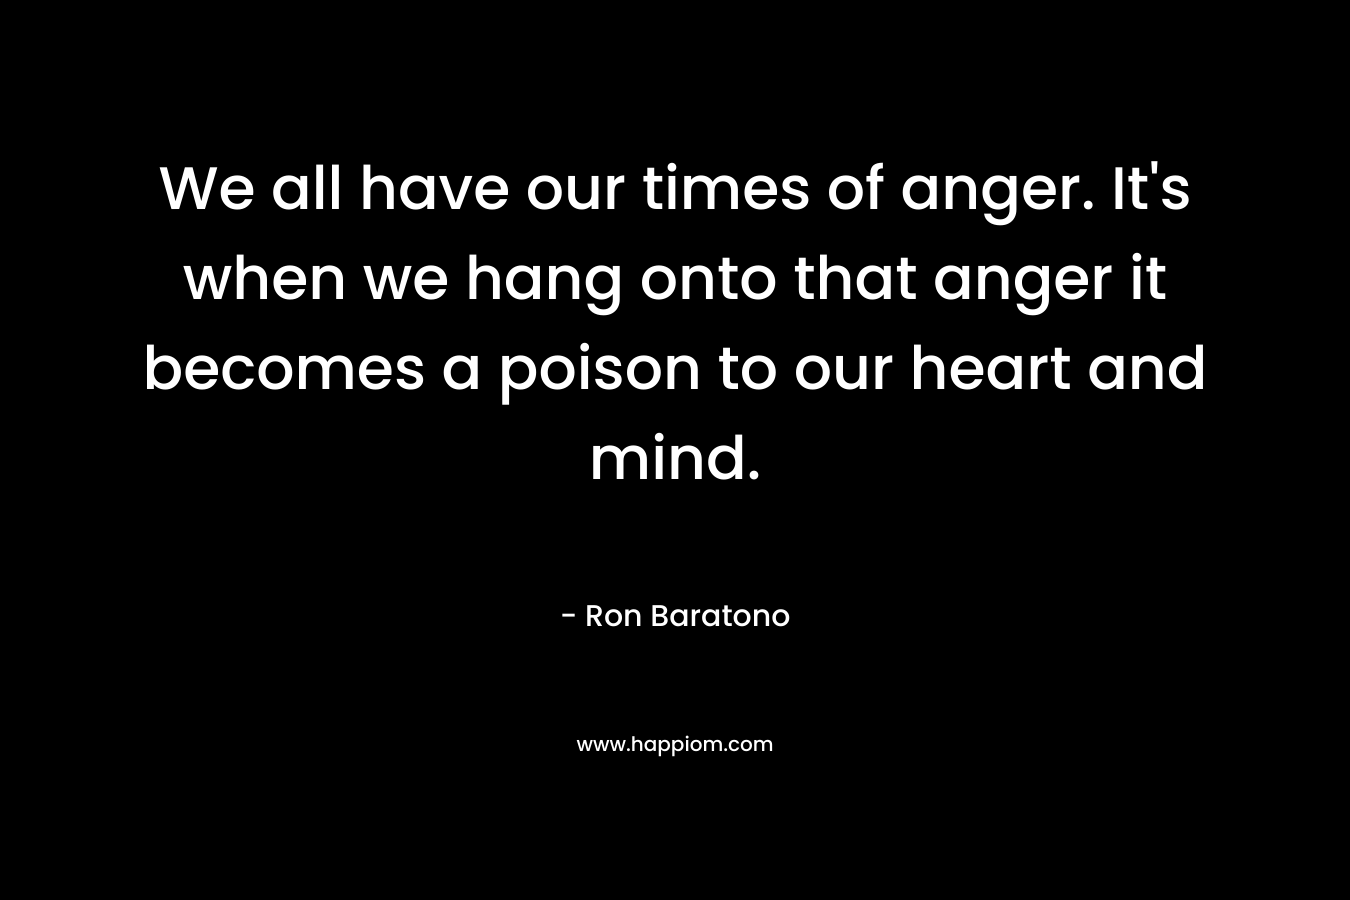 We all have our times of anger. It's when we hang onto that anger it becomes a poison to our heart and mind.